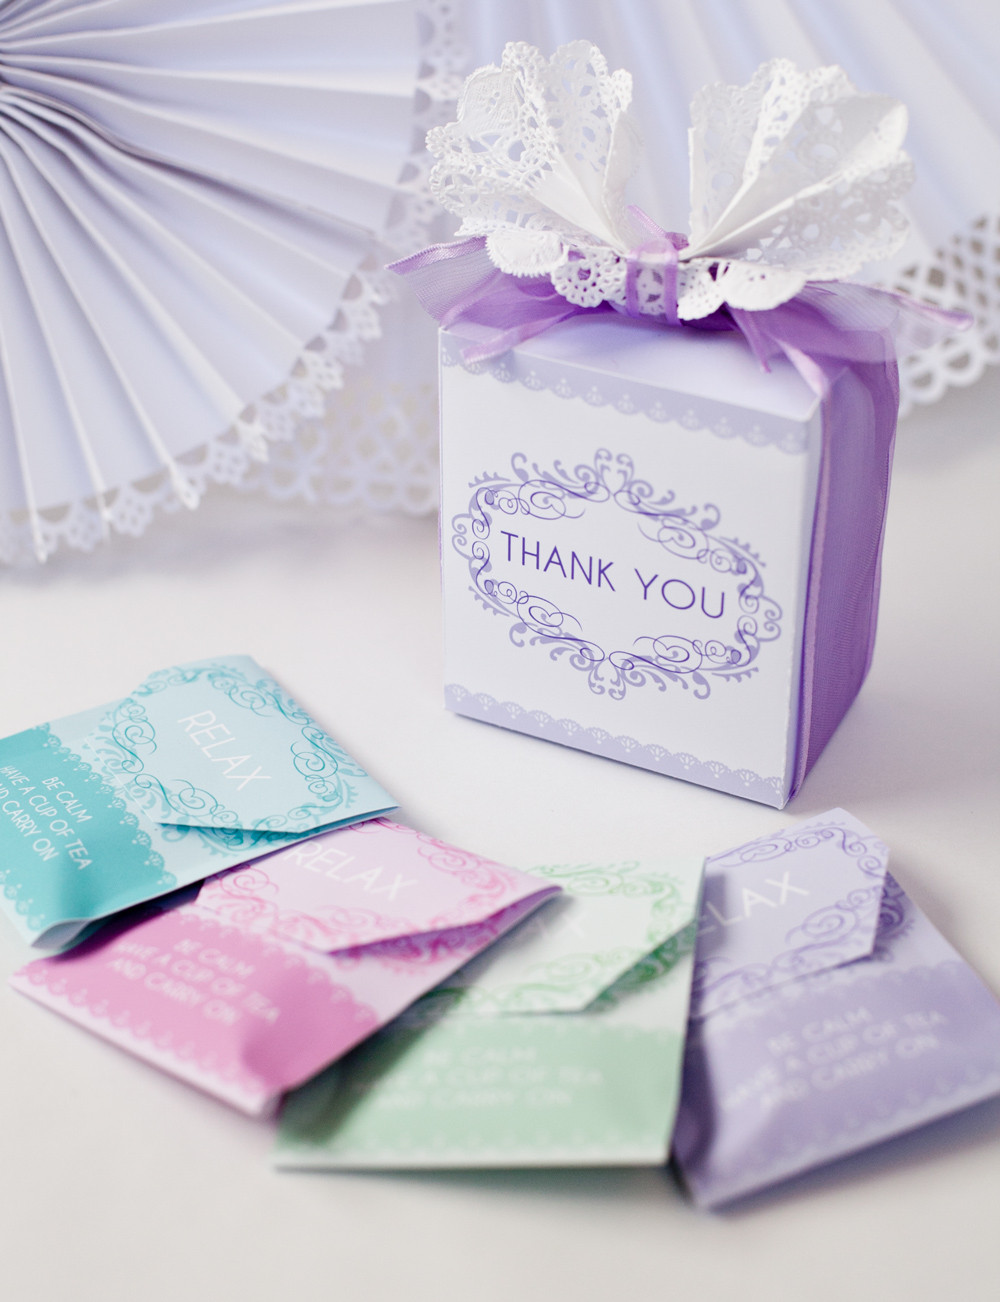 Tea Party Favors Baby Shower
 DIY Baby Shower Tea Party Favor Free Printable